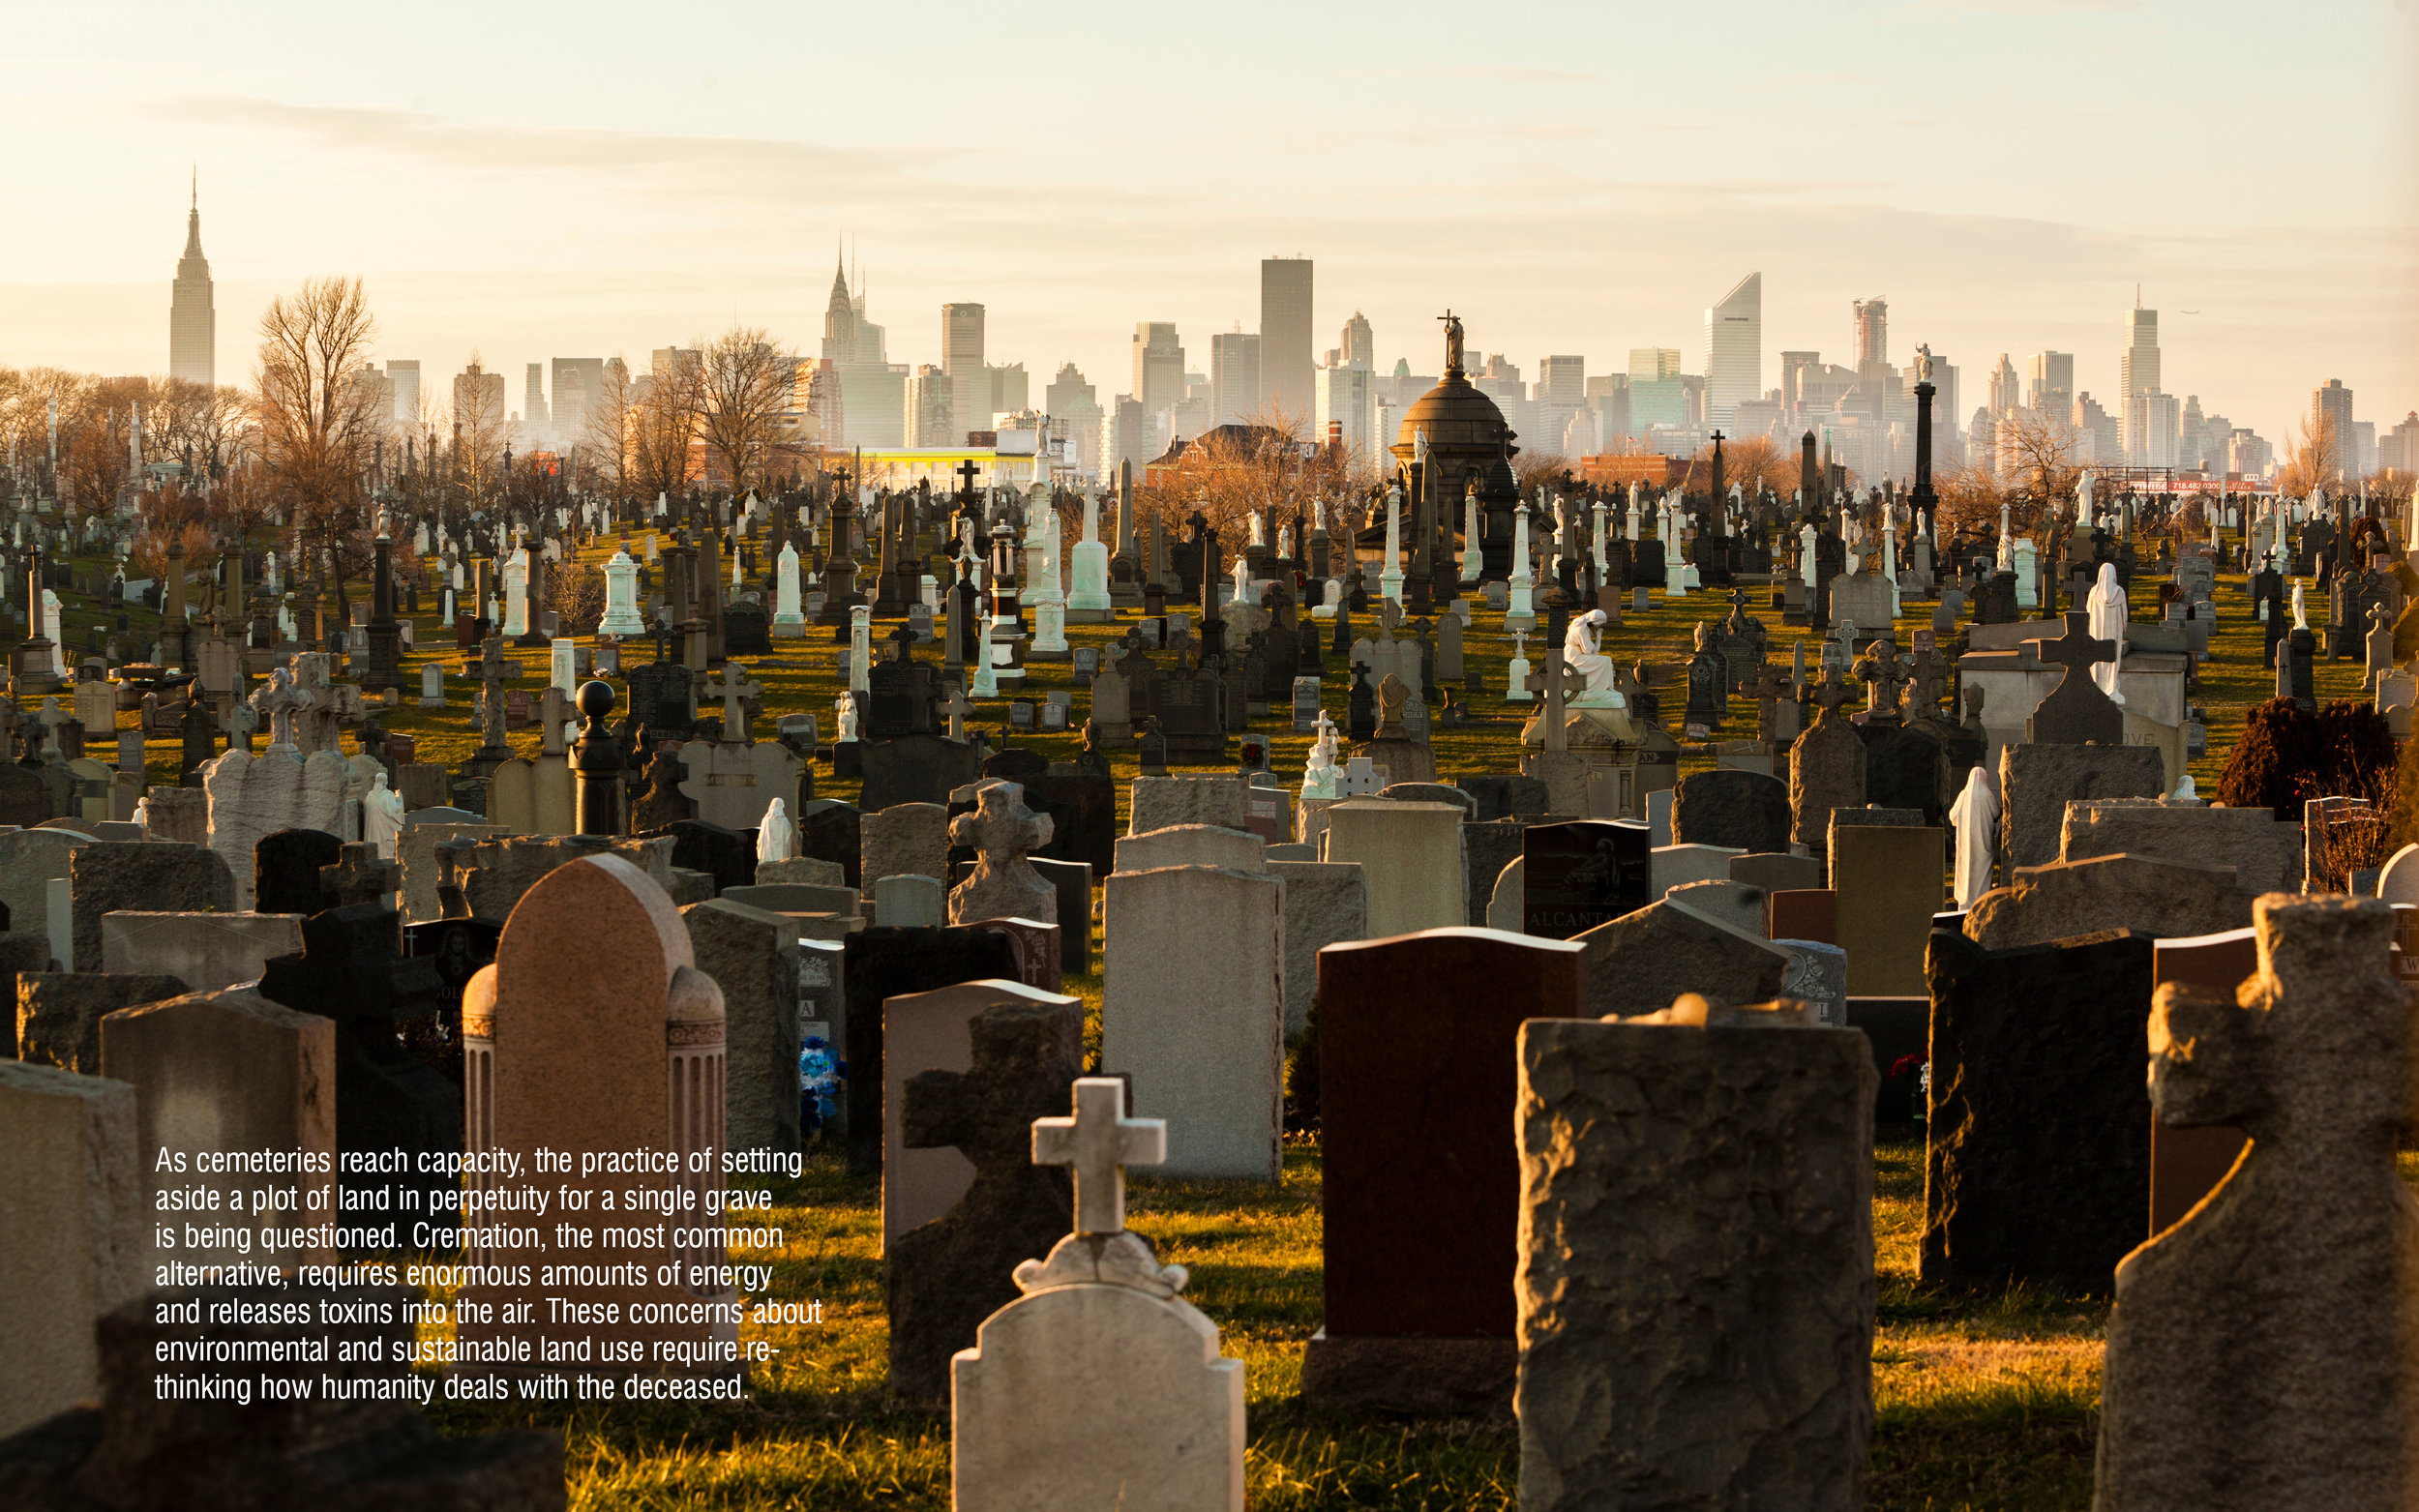  Traditional cemeteries require ever-increasing acres 